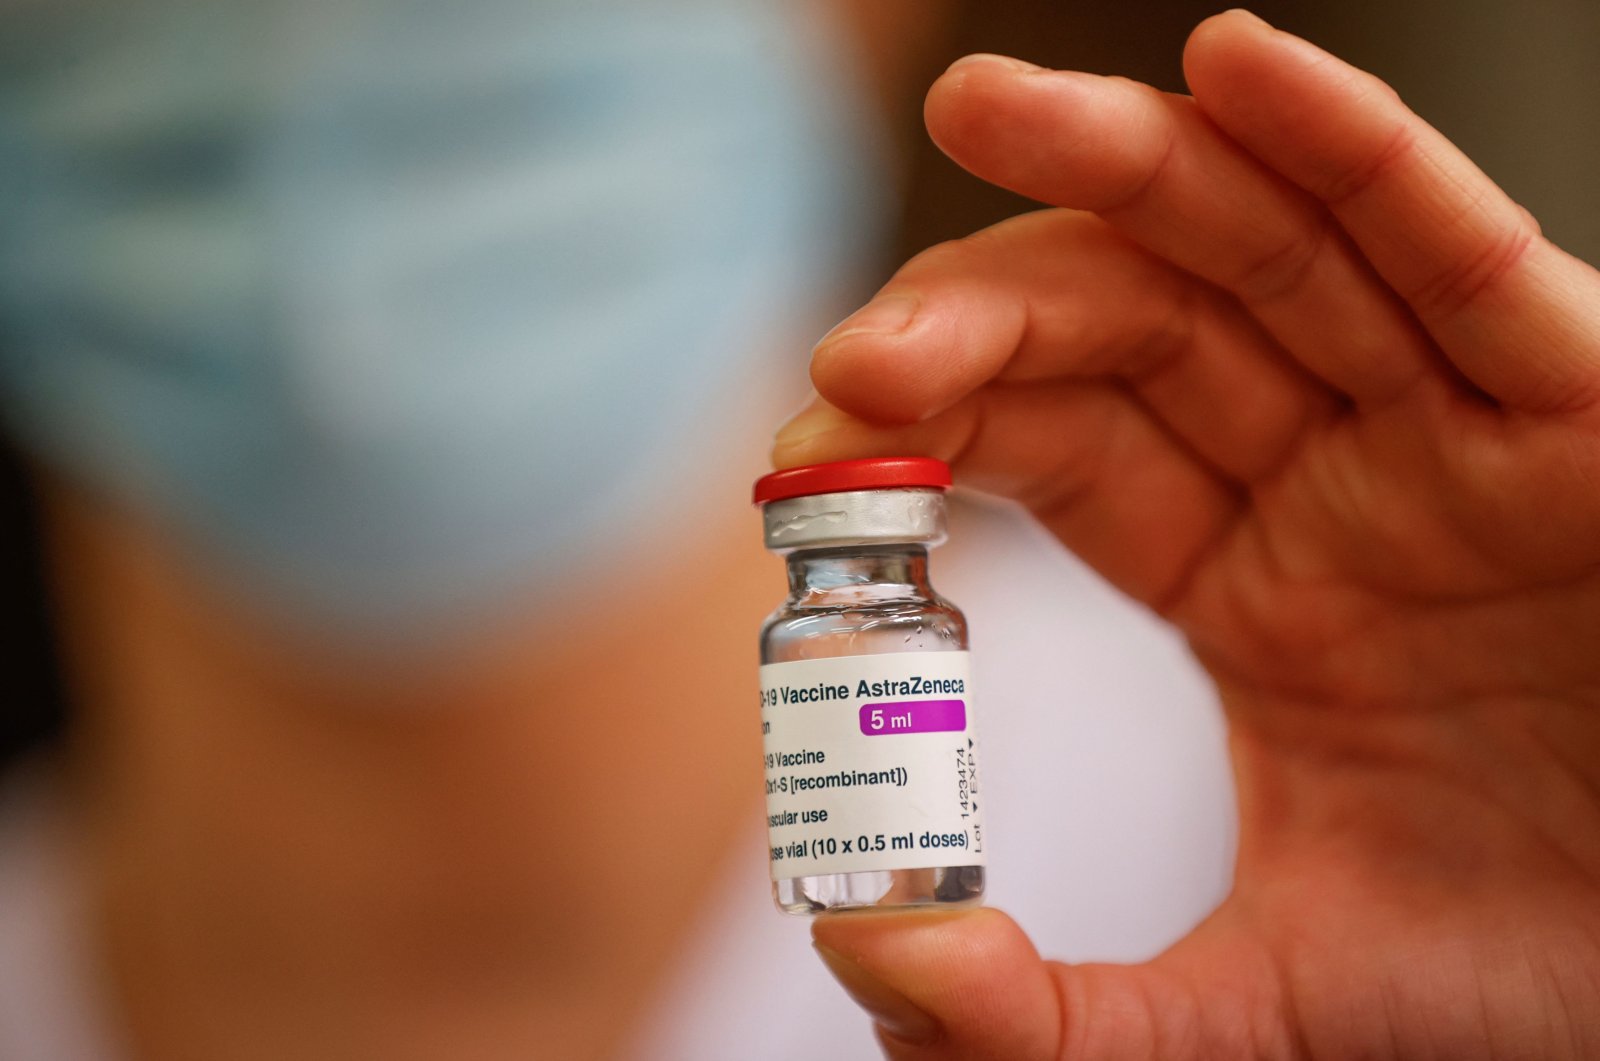  A member of the medical staff holds a vial of the AstraZeneca/Oxford Covid-19 vaccine at the South Ile-de-France Hospital Group (Groupe Hospitalier Sud Ile-de-France), in Melun, on the outskirts of Paris, on February 8, 2021. (AFP Photo)